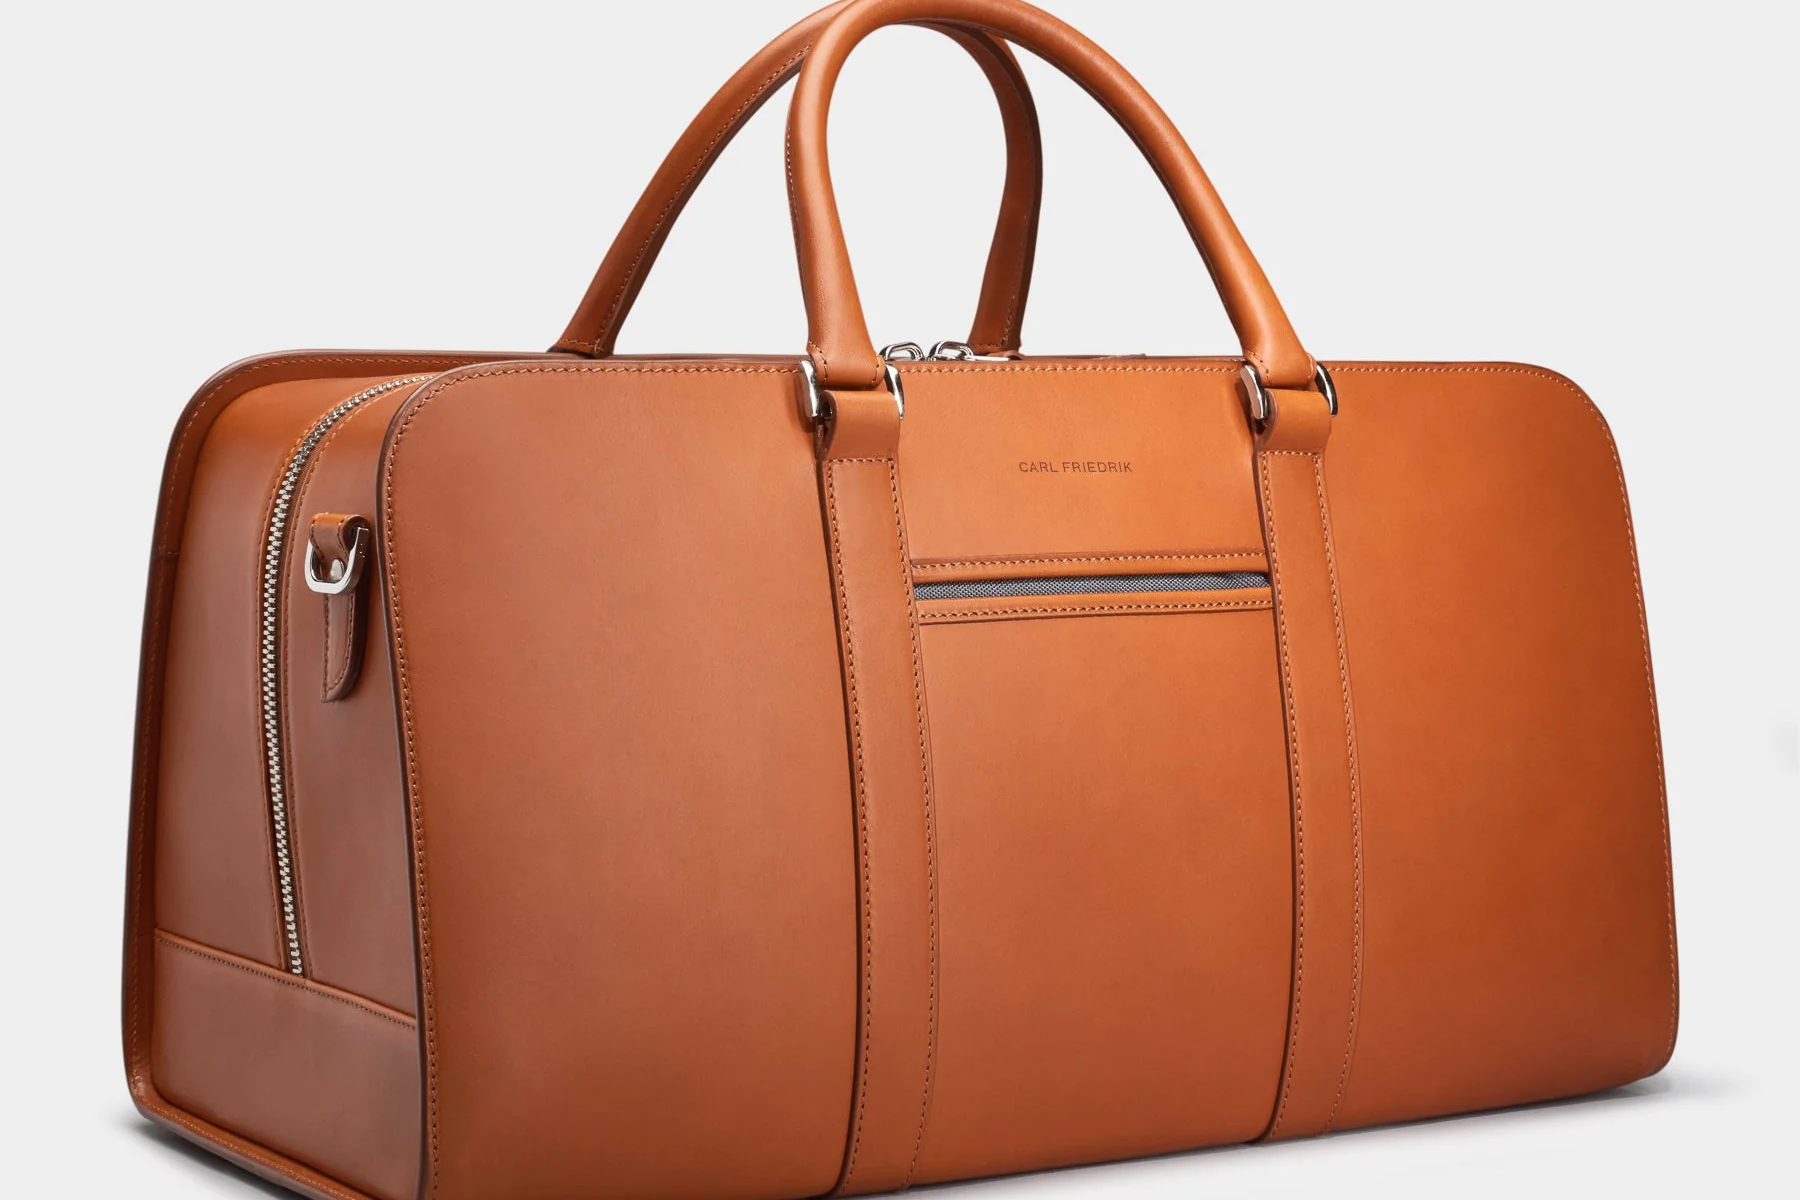 Cognac colored leather weekend bag called the Palissy